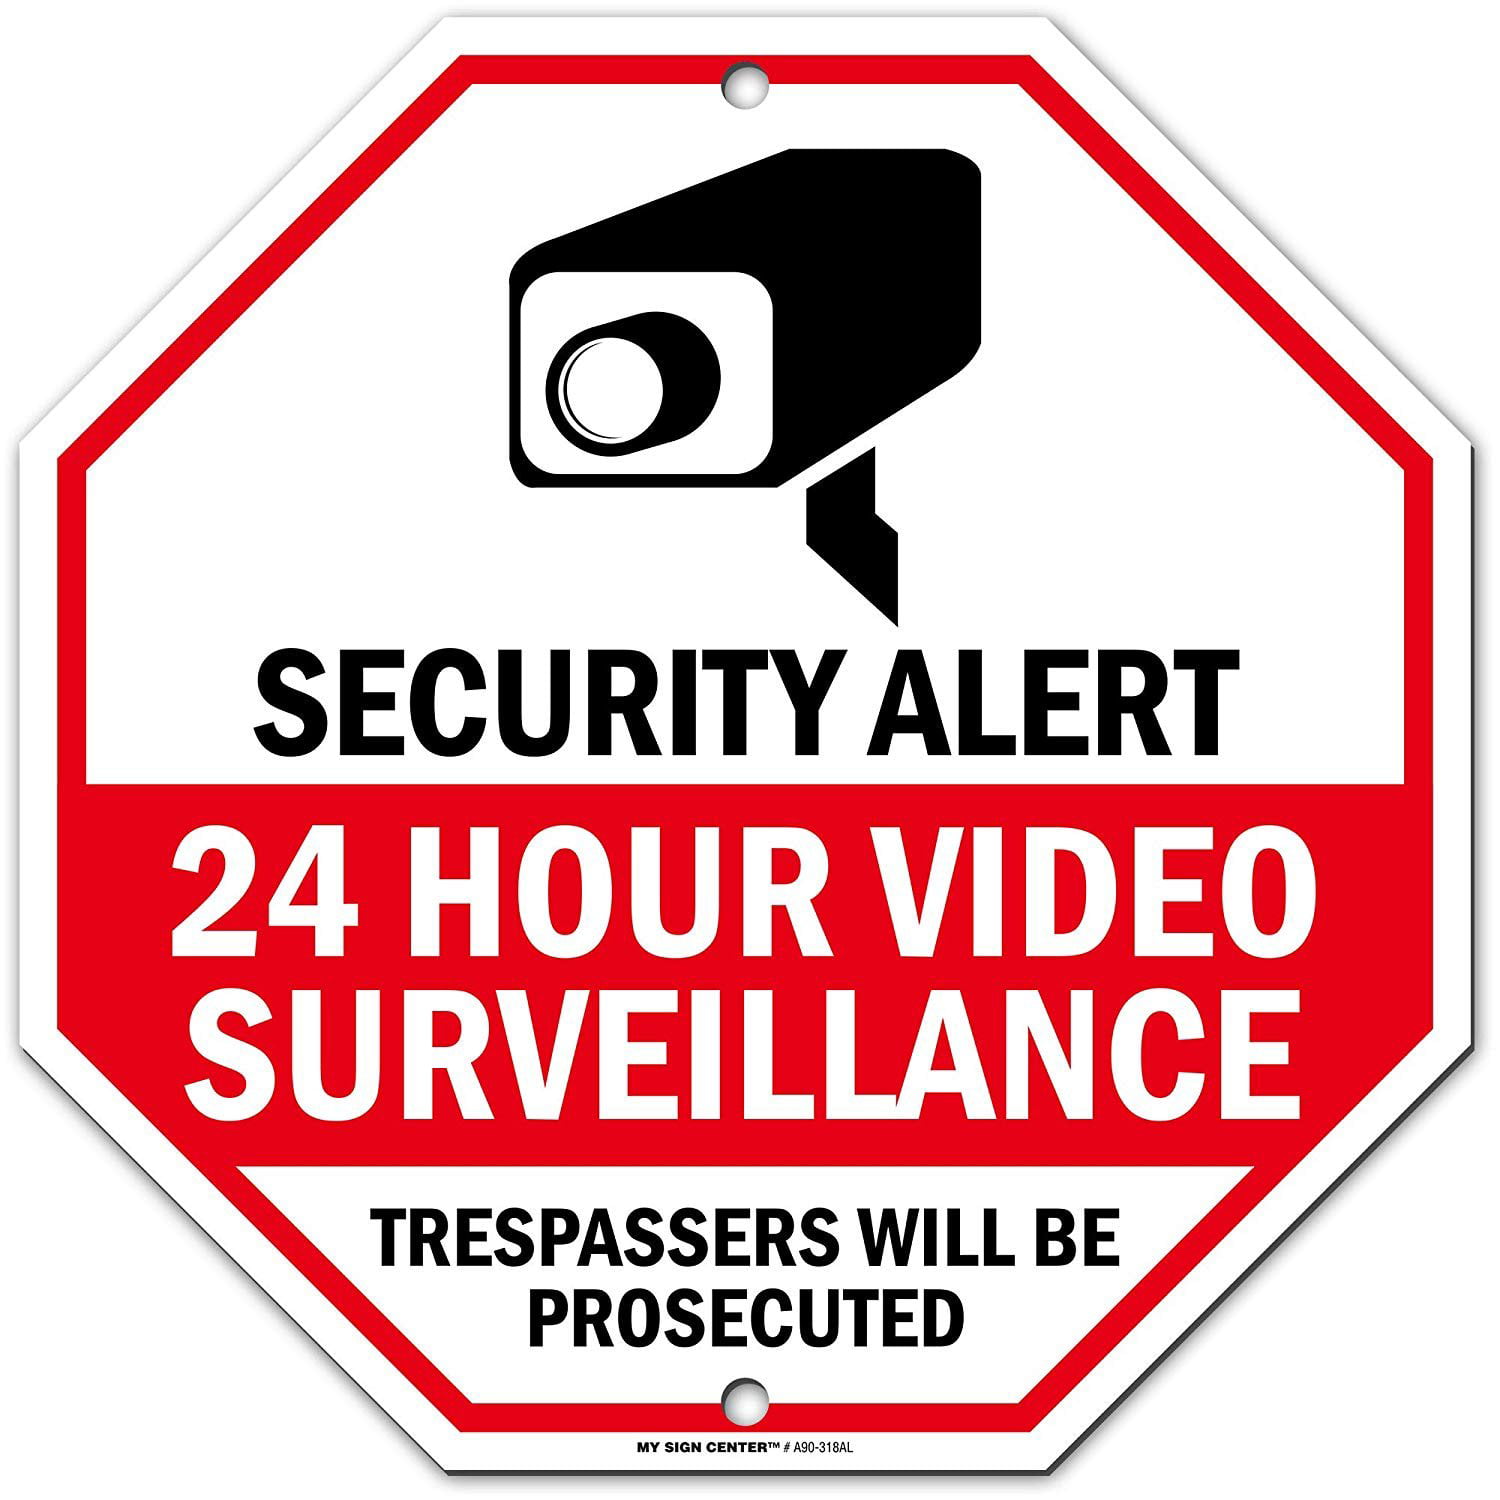 12" x 18" .040 THICK ALUM SIGN FREE SHIPPING 24 HOUR VIDEO SURVEILLANCE 